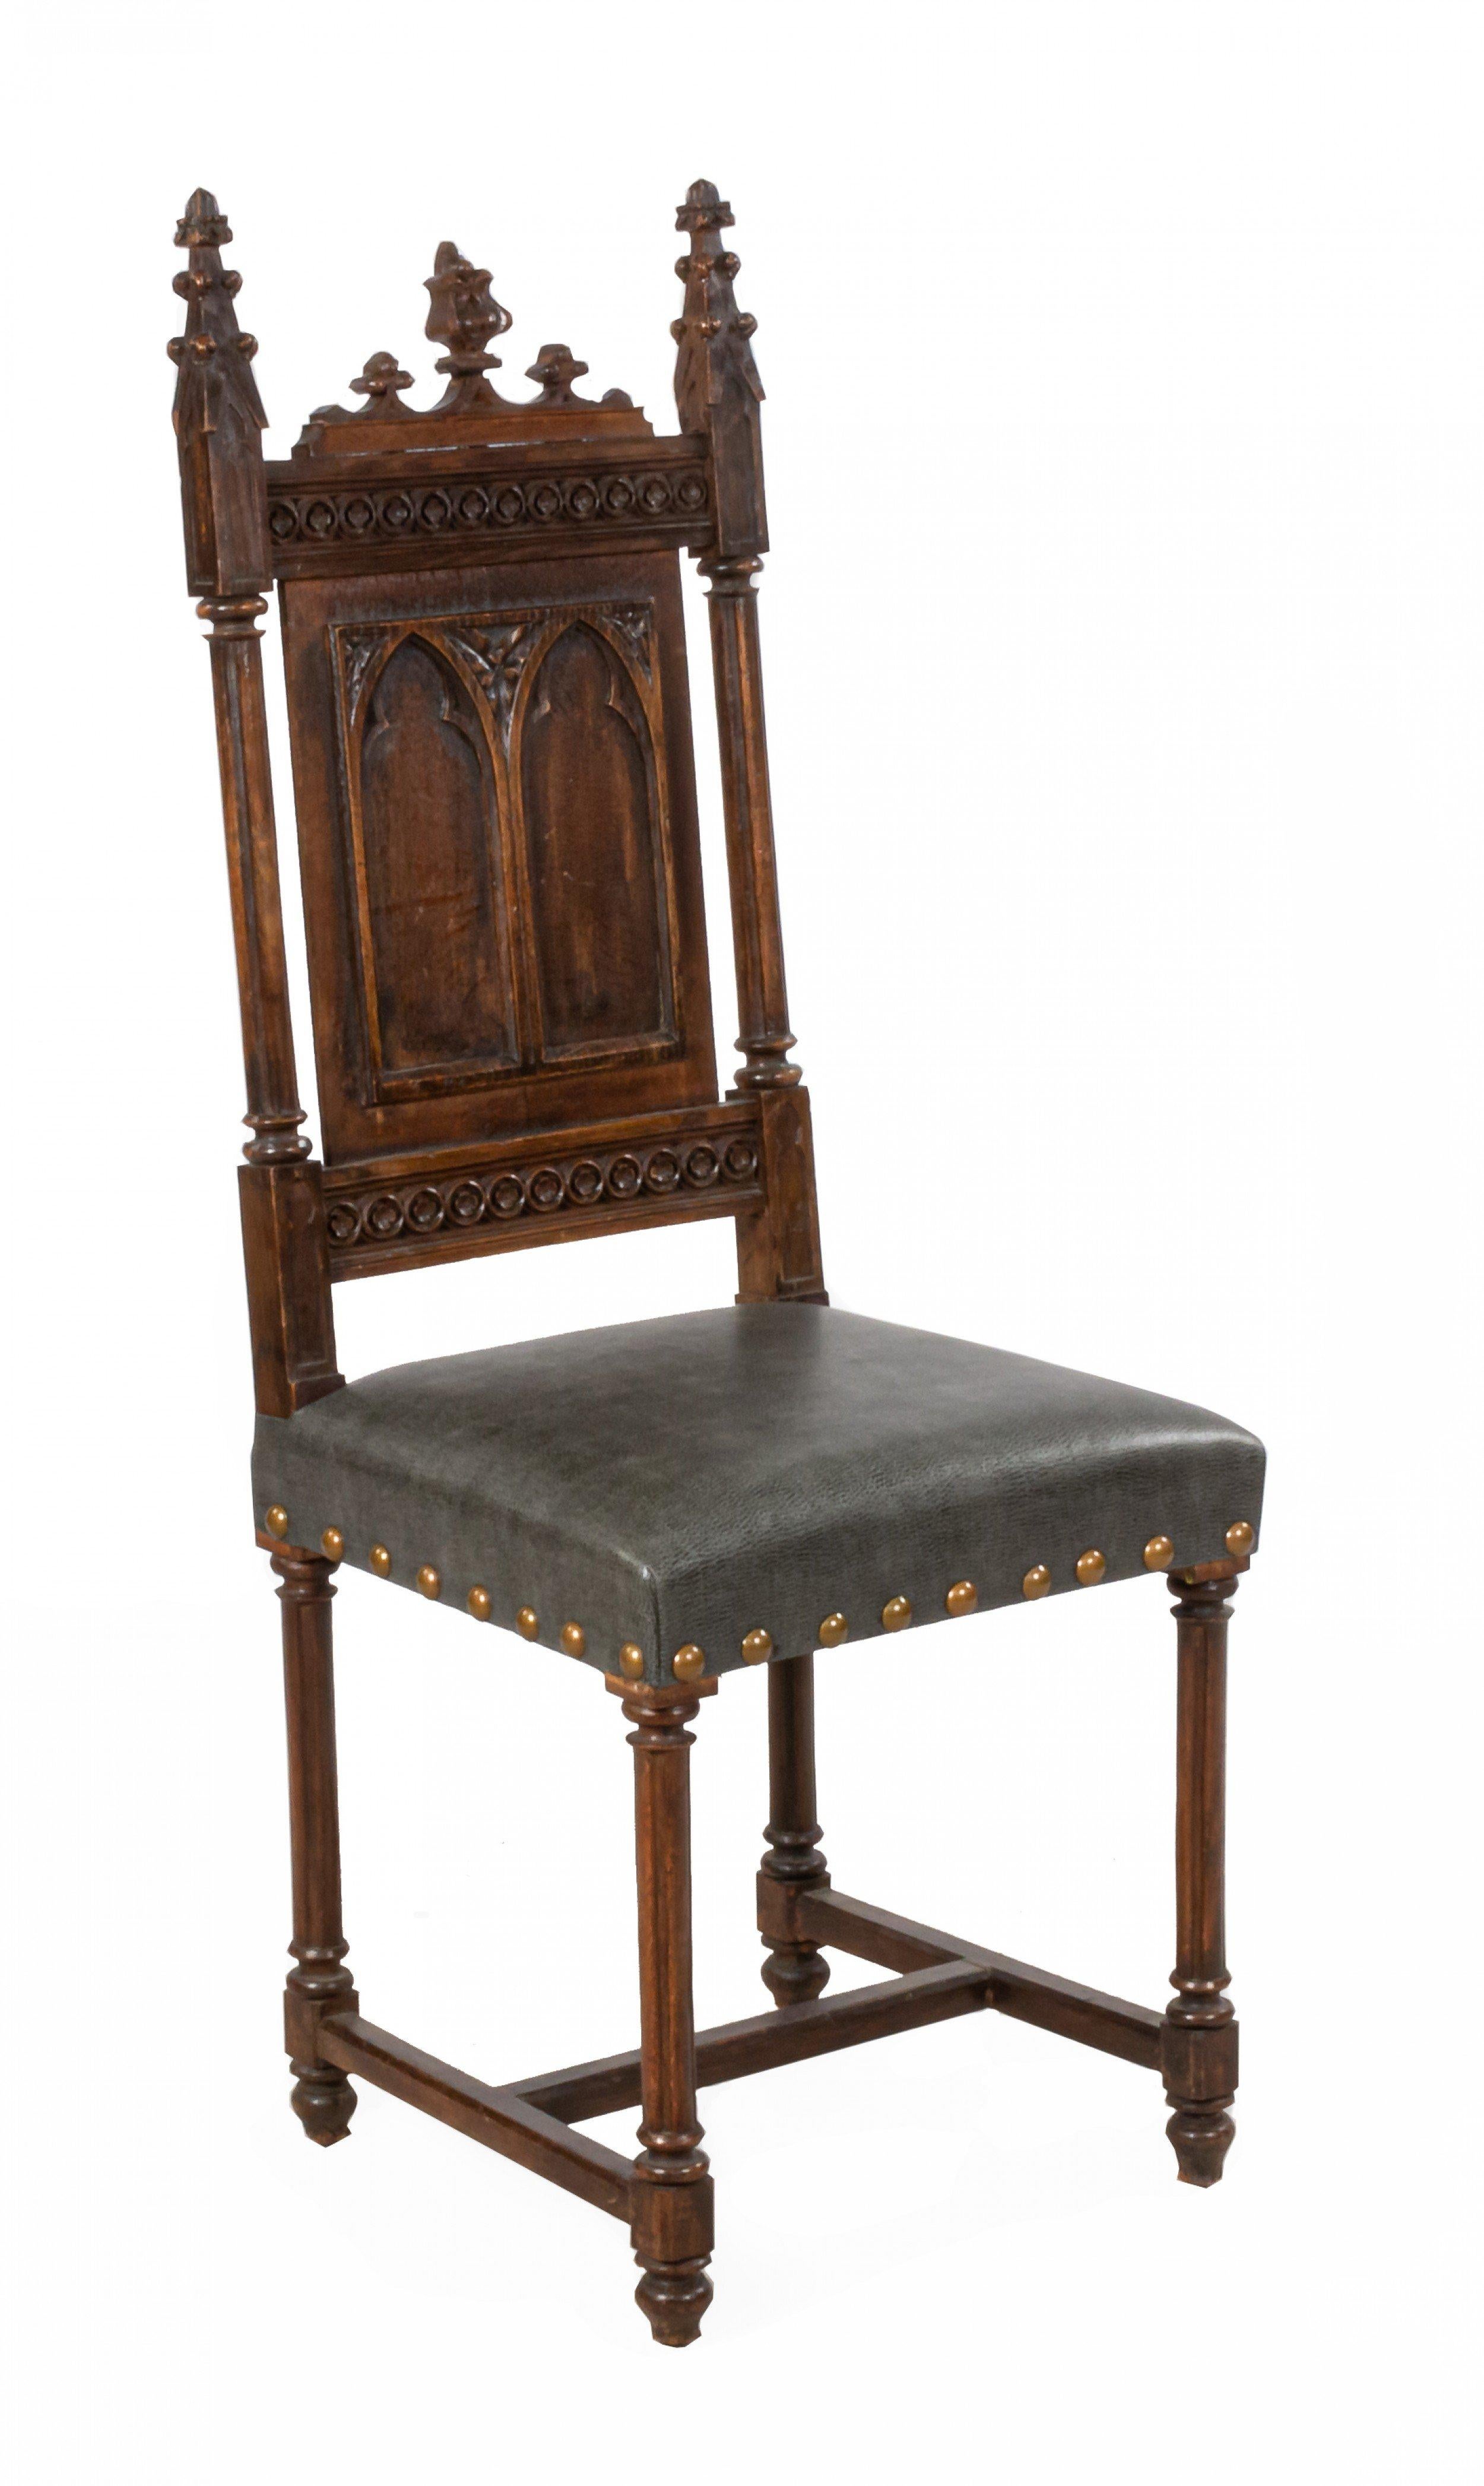 gothic revival chair